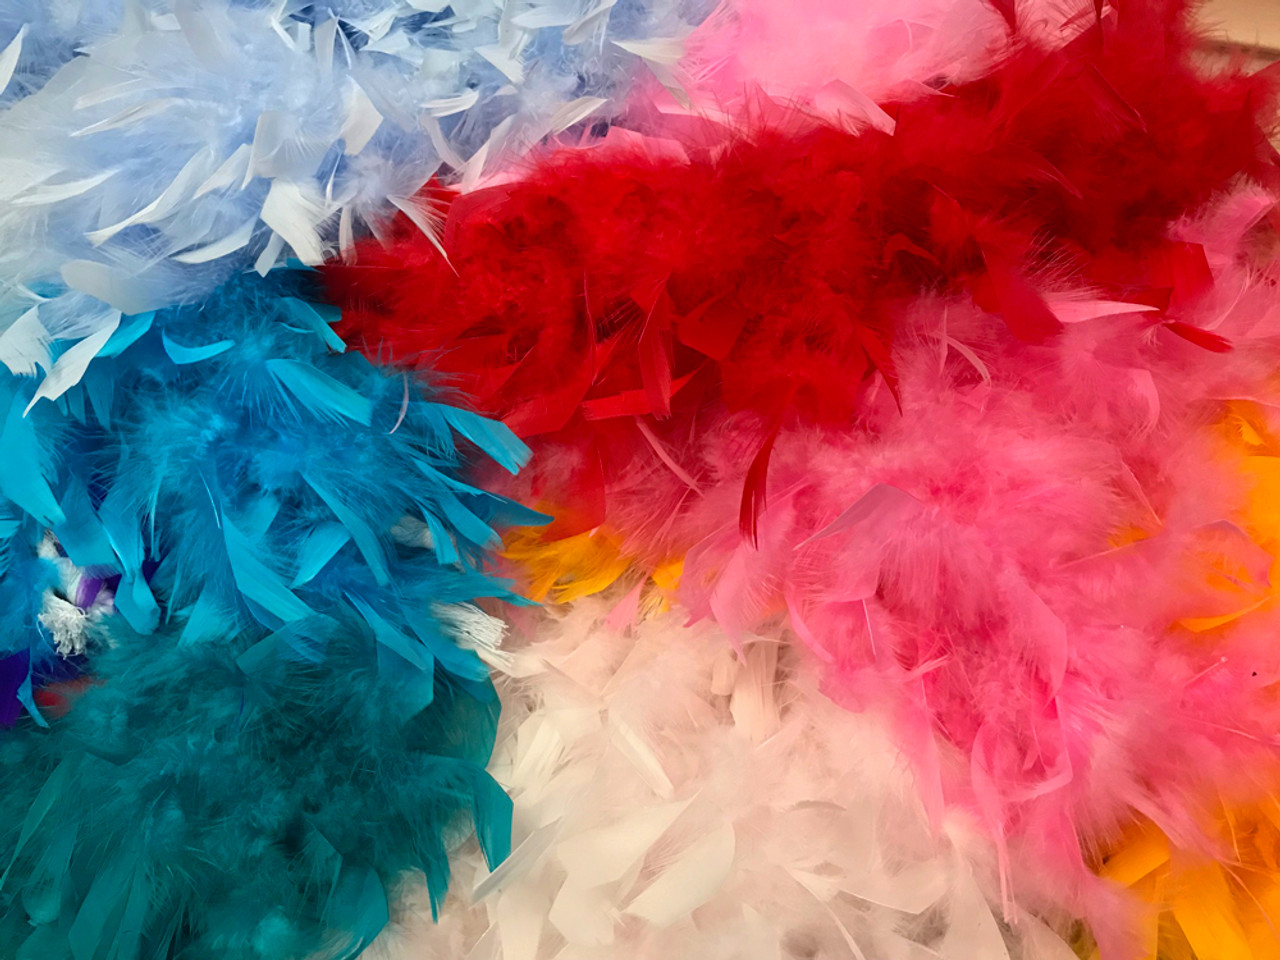 Candy Pink Color 150 Gram Chandelle Feather Boa, 2 Yard Long-great for  Party, Wedding, Costume 